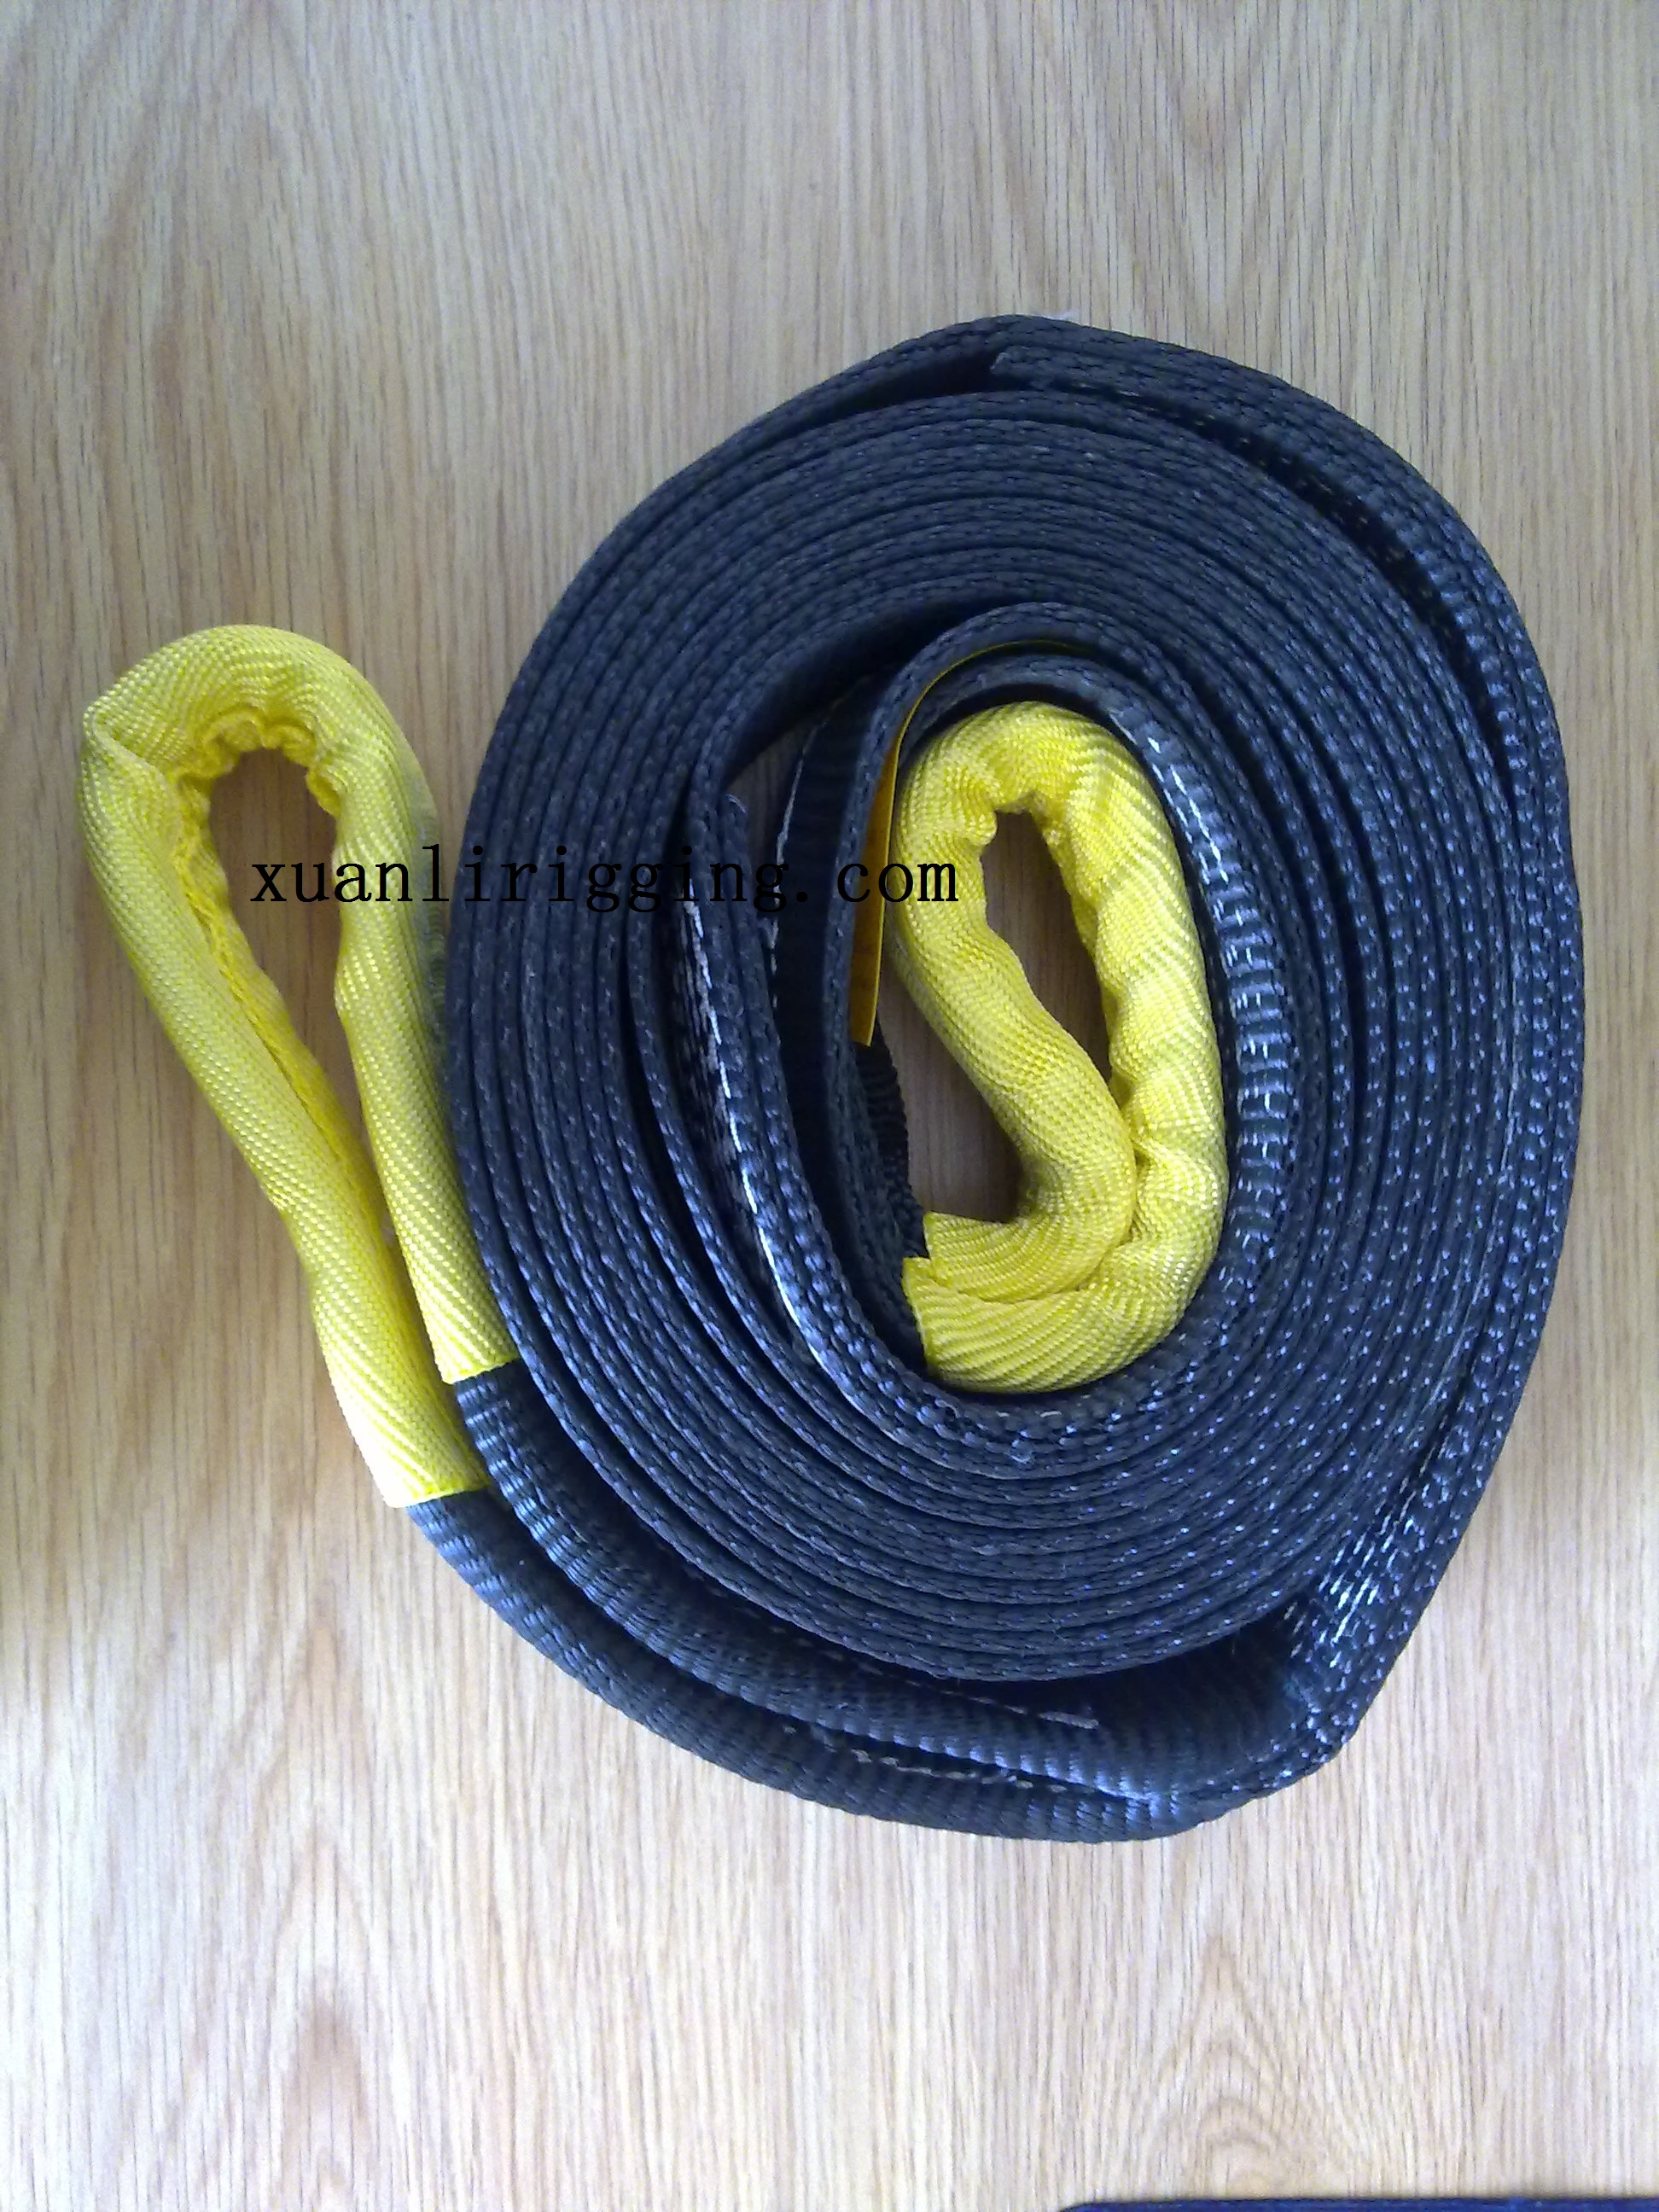 4wd snatch strap offroad recovery strap 